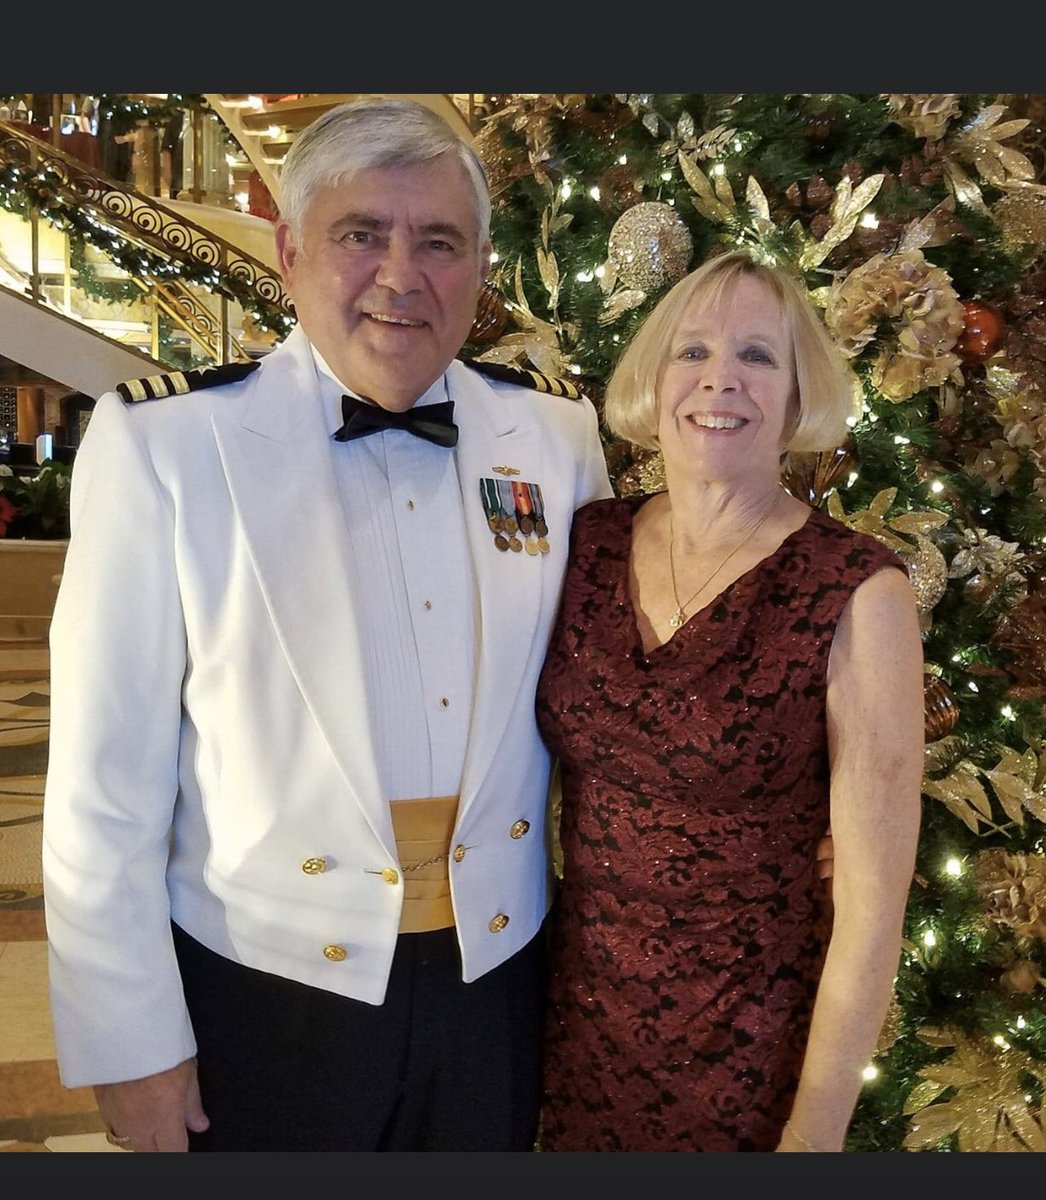 You guys - my in-laws are STILL quarantined on the #GrandPrincessCruise - hoping they can get off tomorrow. Spent a week stuck in their tiny room. Dad says about 500 passengers remain to disembark. (Pic from a different Christmas cruise) #coronavirus #cruiseship